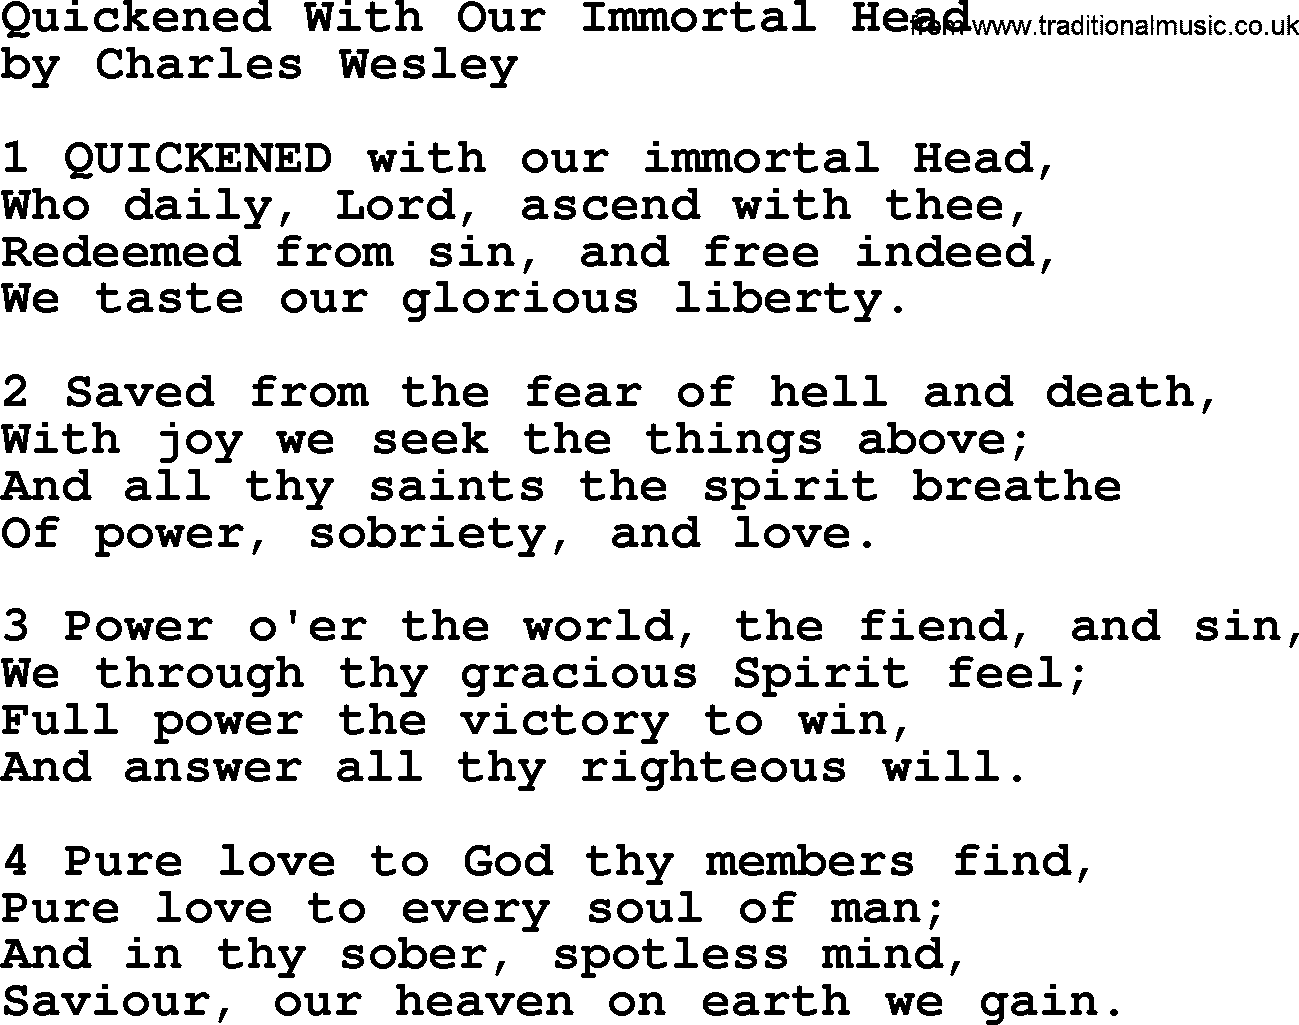 Charles Wesley hymn: Quickened With Our Immortal Head, lyrics